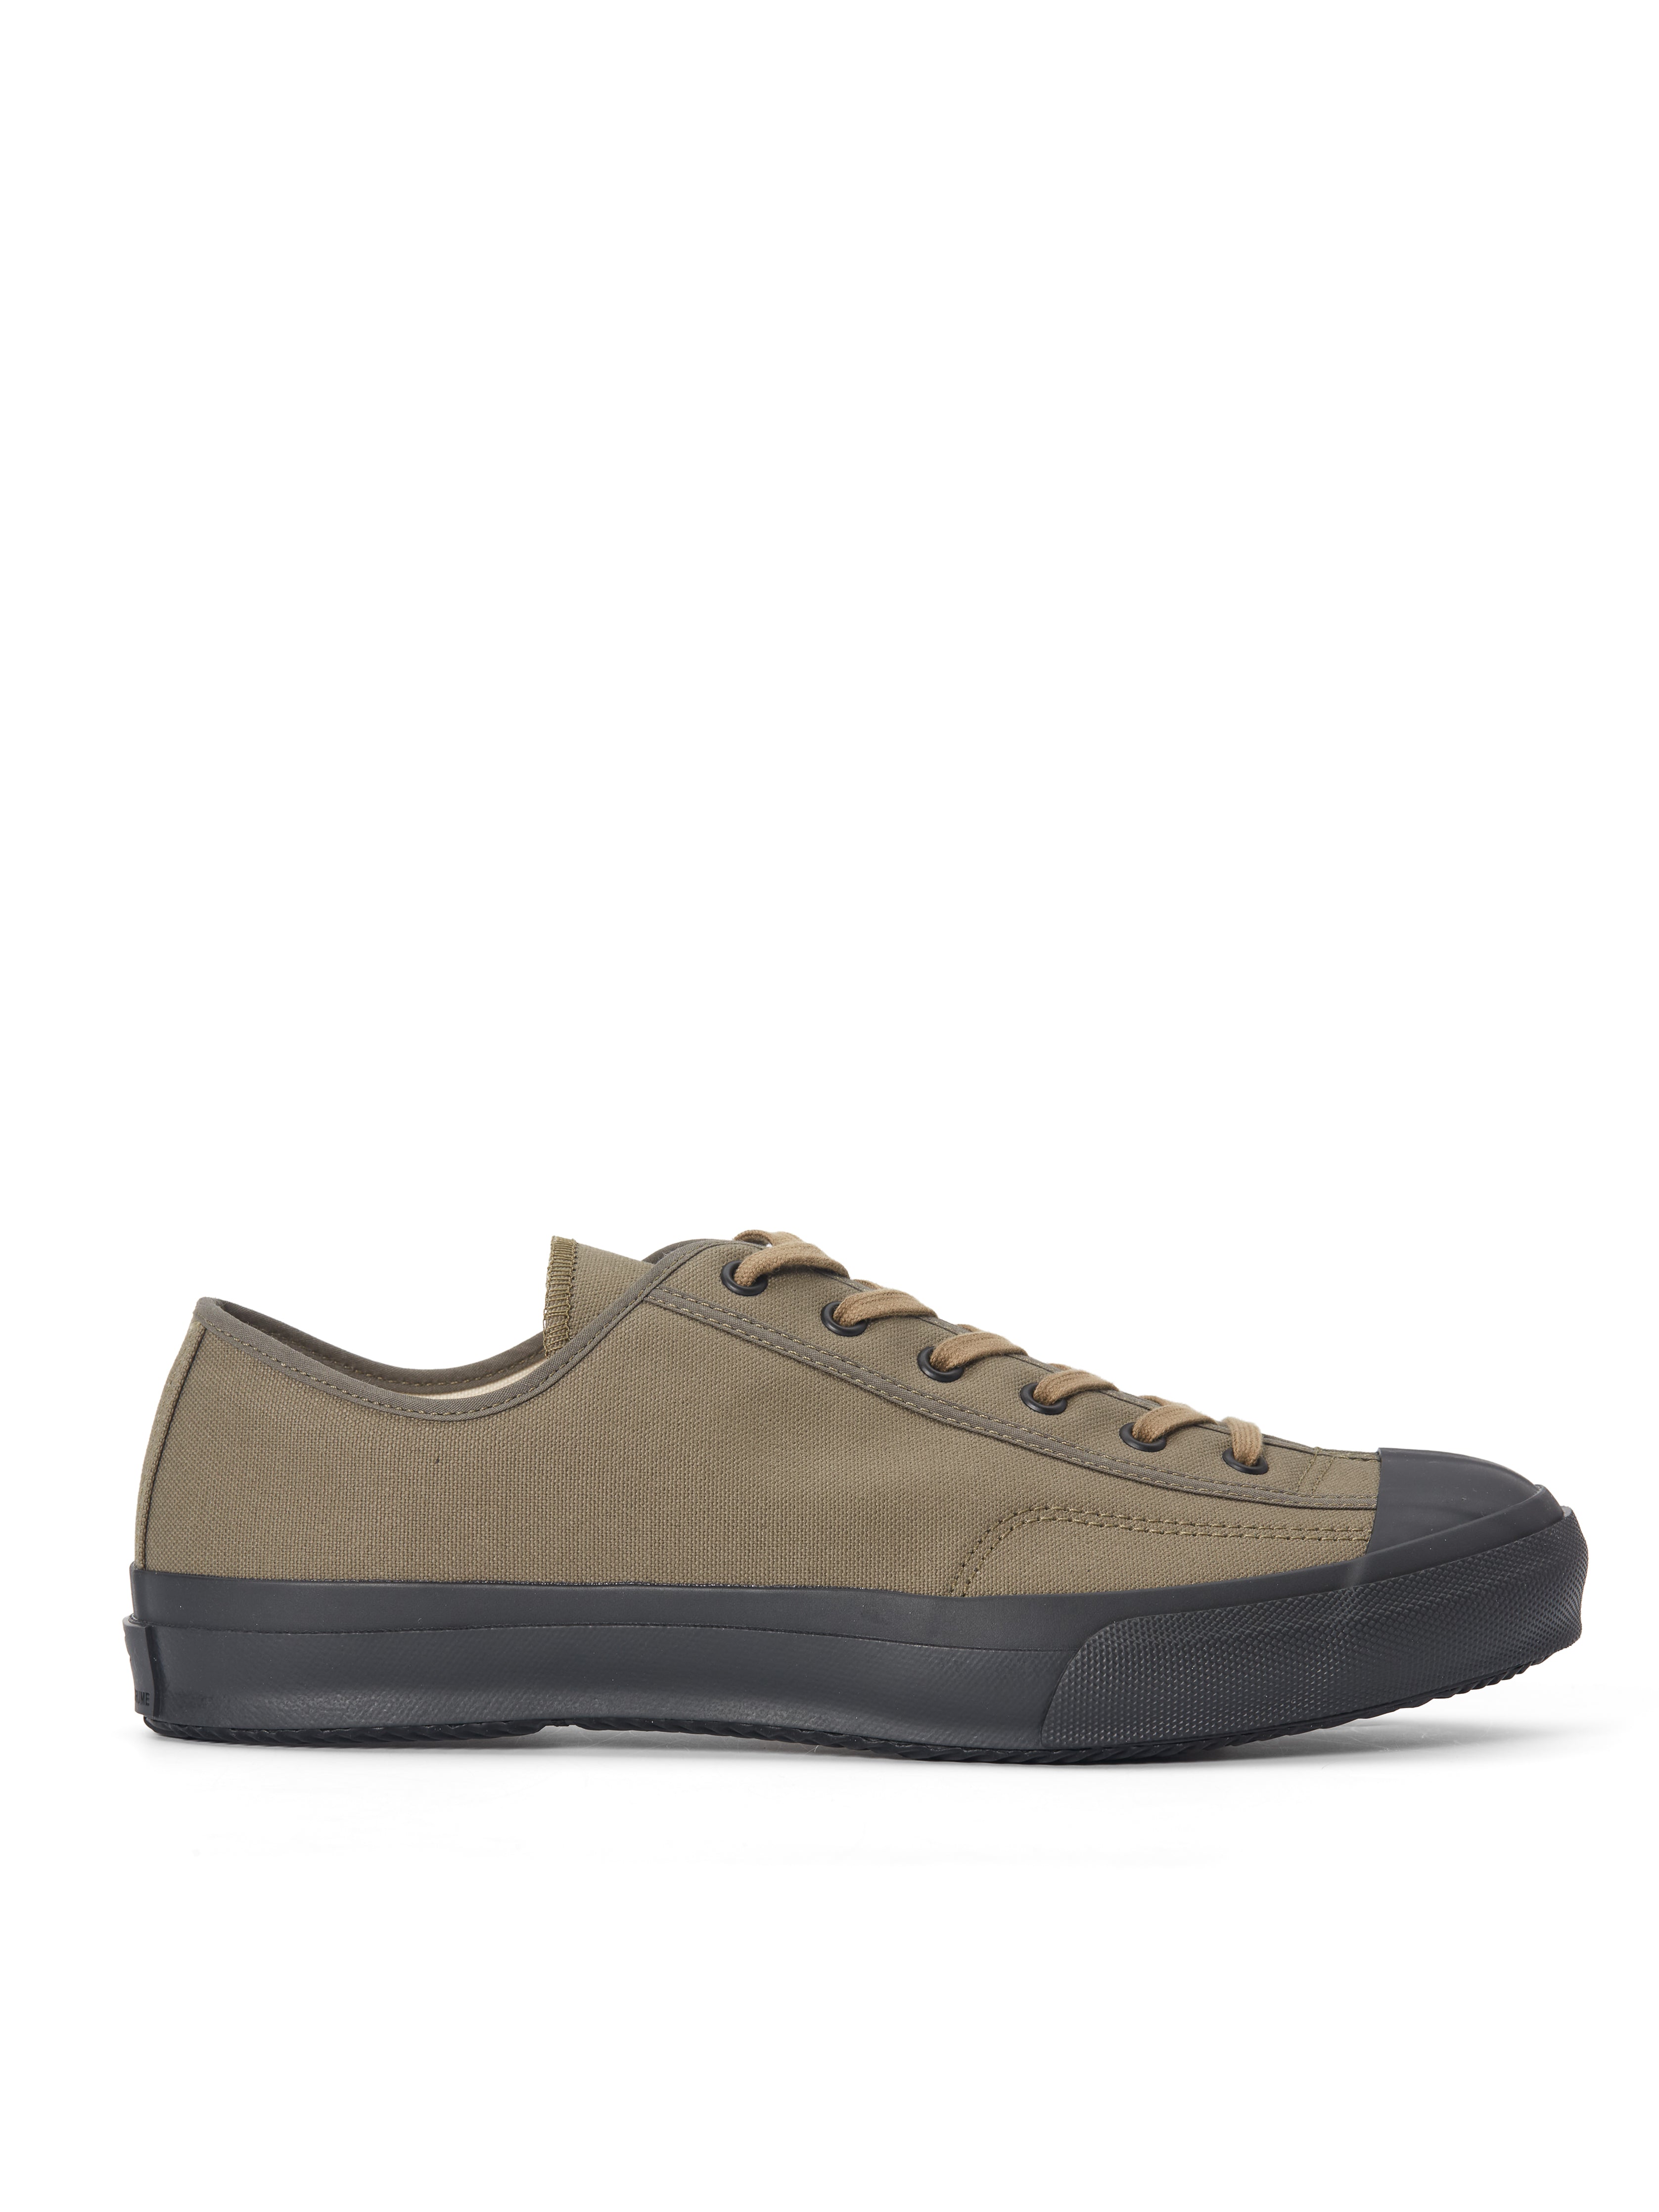 Moonstar Gym Classic Olive